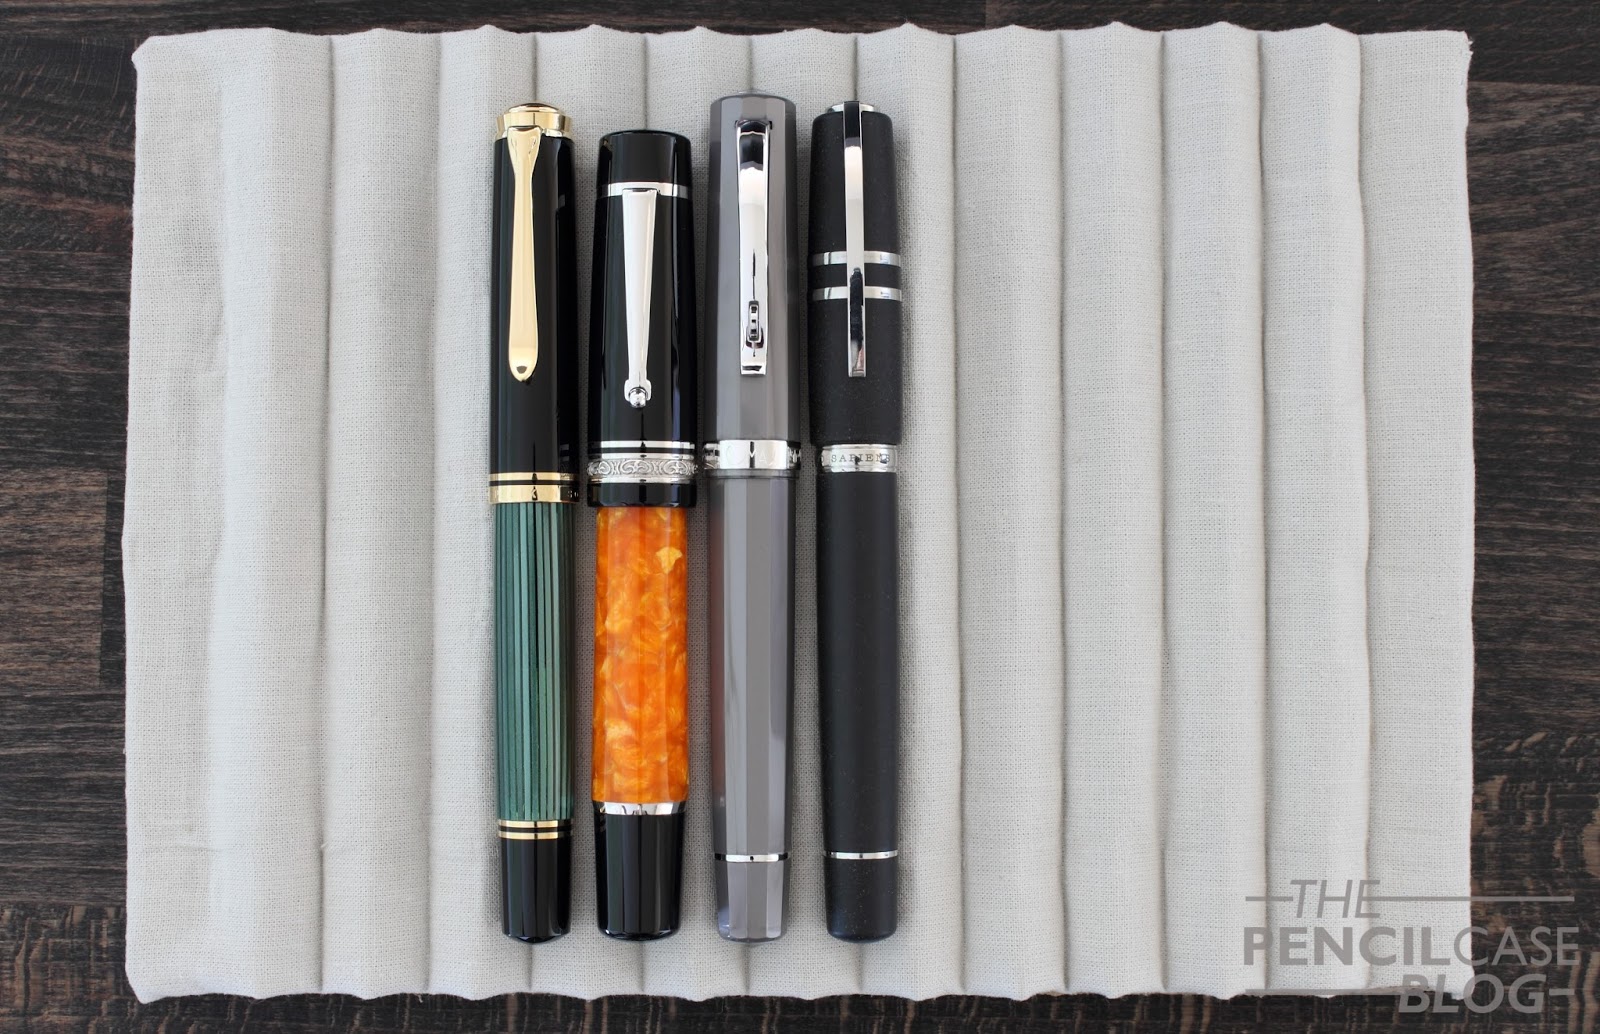 DELTA OVERSIZE REVIEW The Pencilcase Blog | Fountain pen, Pencil, Ink and Paper reviews